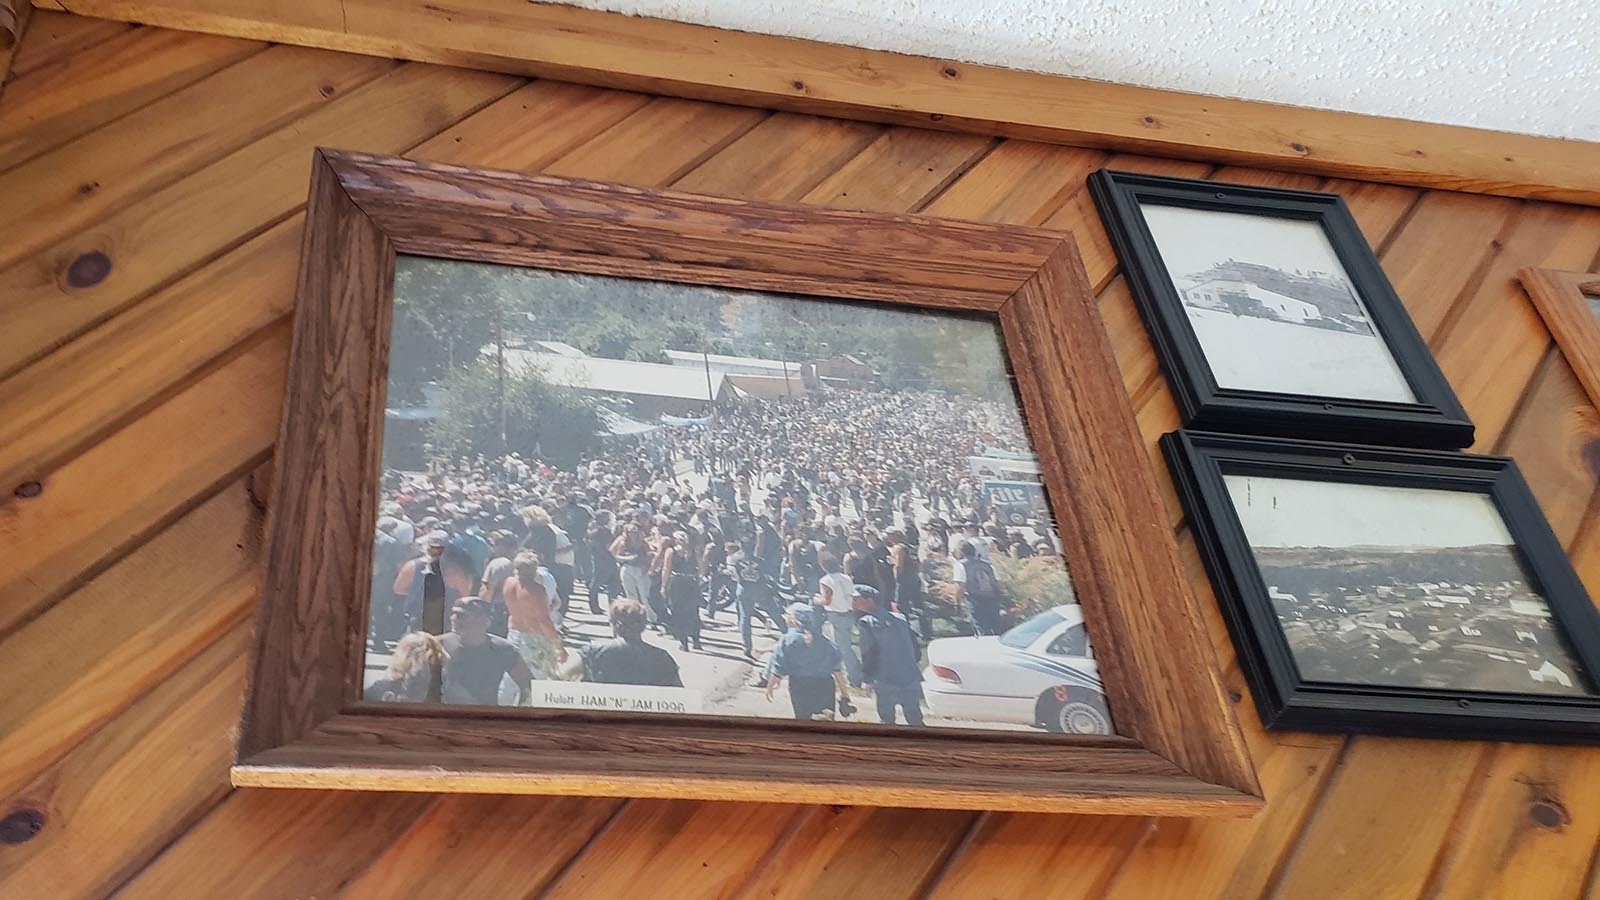 Photos of previous Ham-N-Jams hang on the walls of Capt'n Ron's Rodeo Bar Lounge.